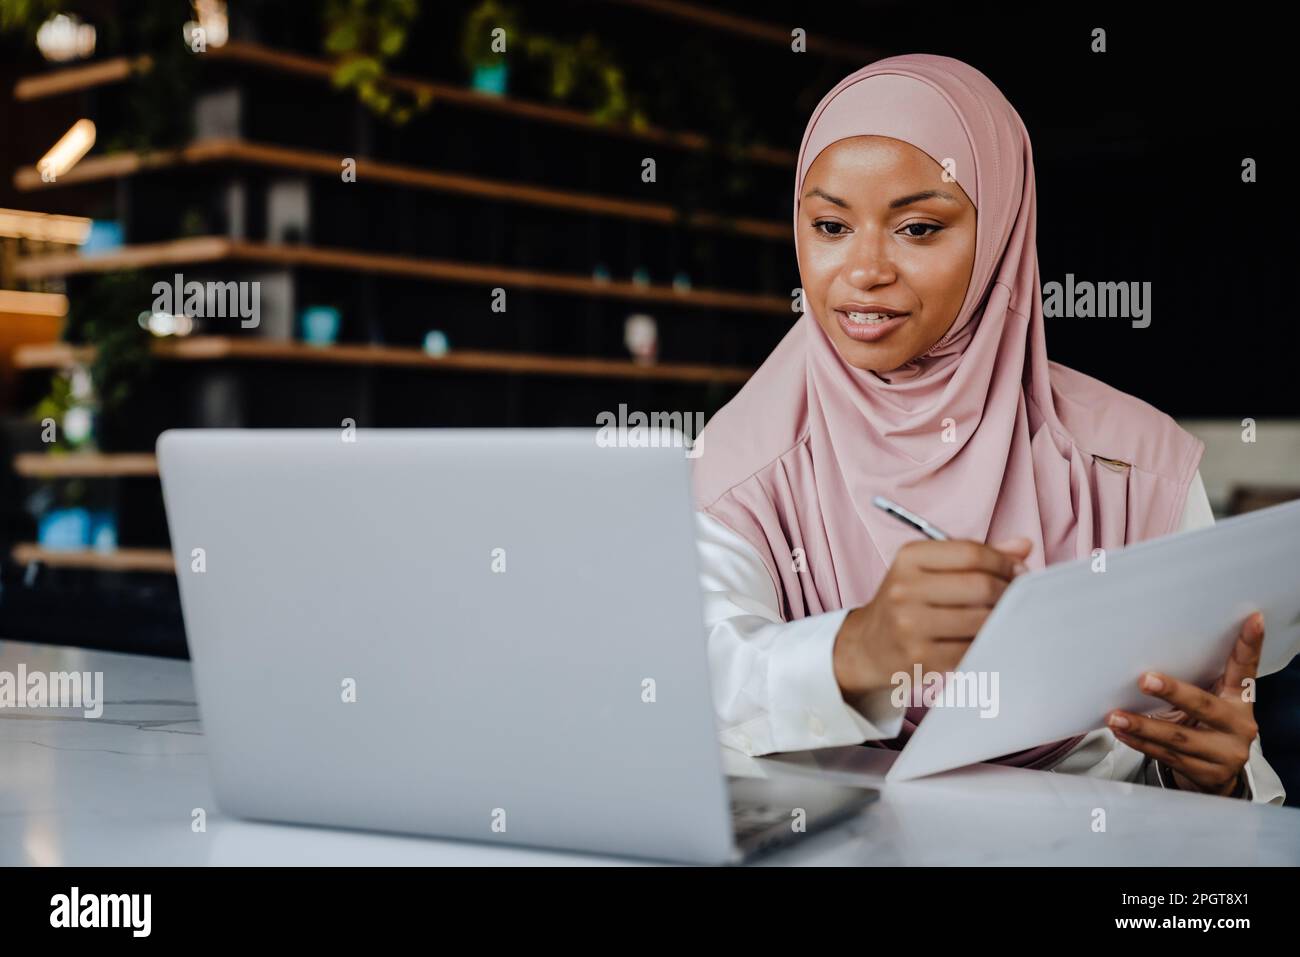 Young muslim woman wearing headscarf smiling while working on laptop in office Stock Photo